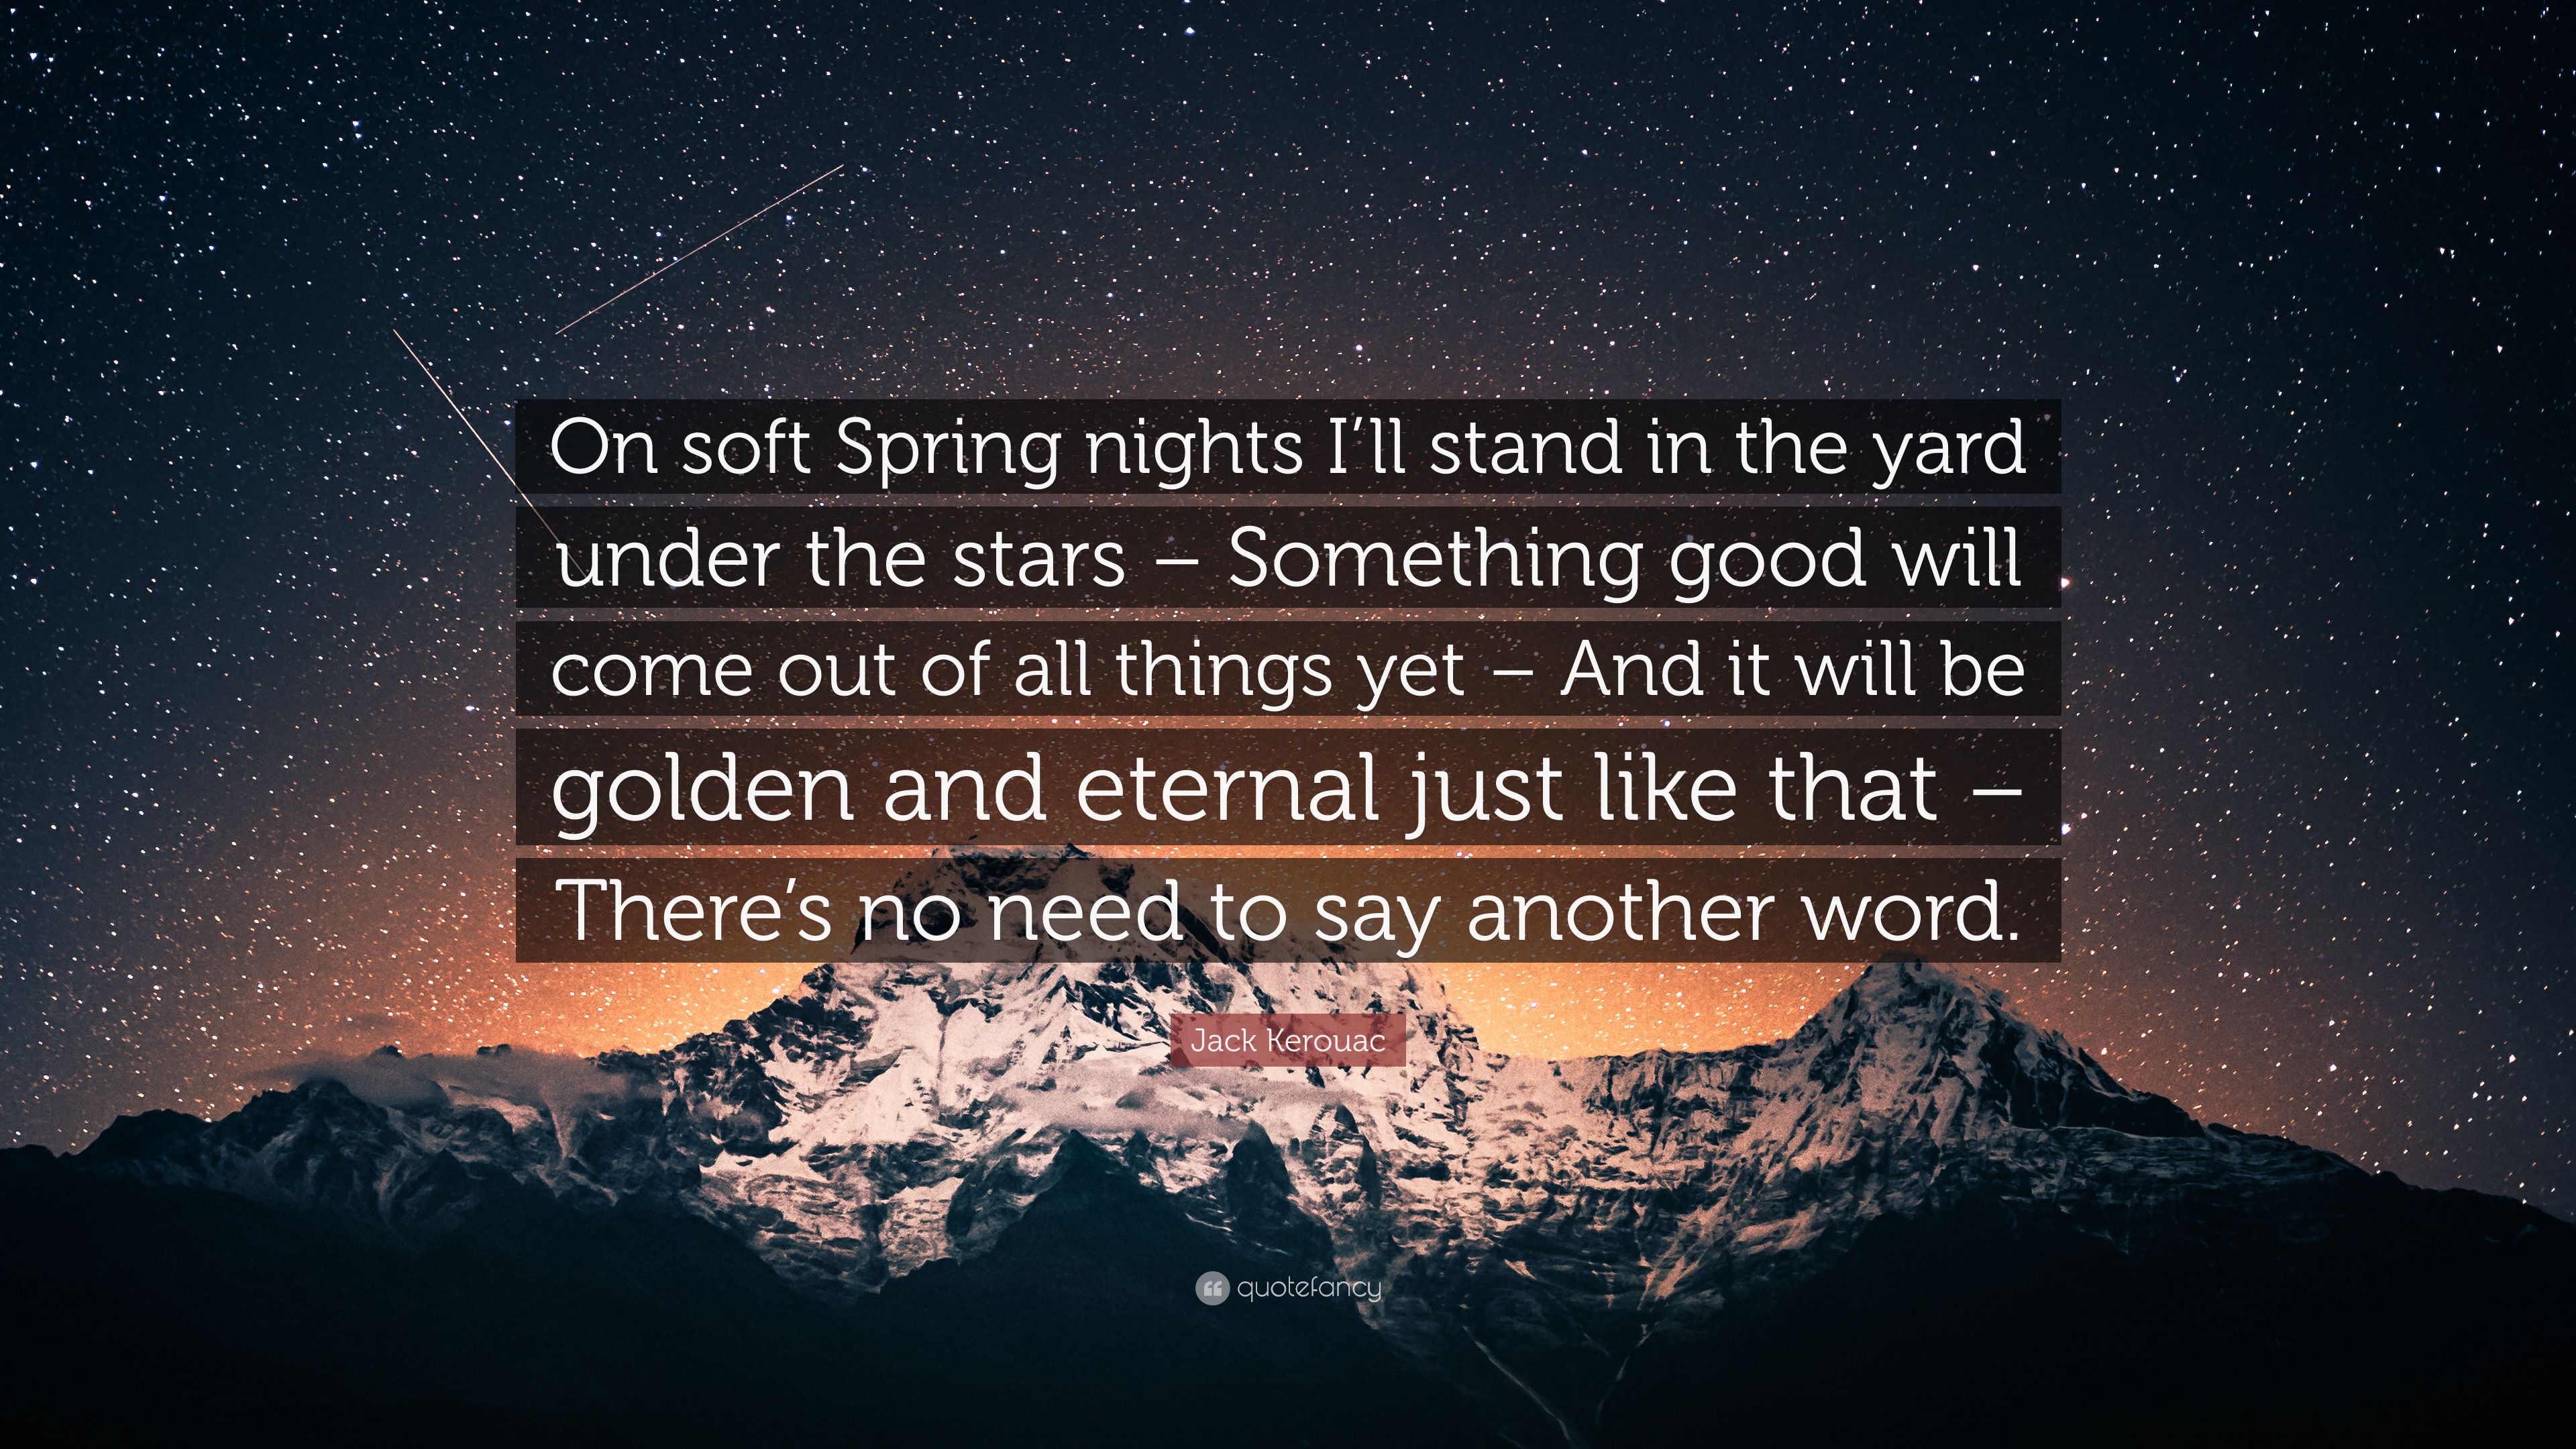 Jack Kerouac Quote: “On soft Spring nights I'll stand in the yard